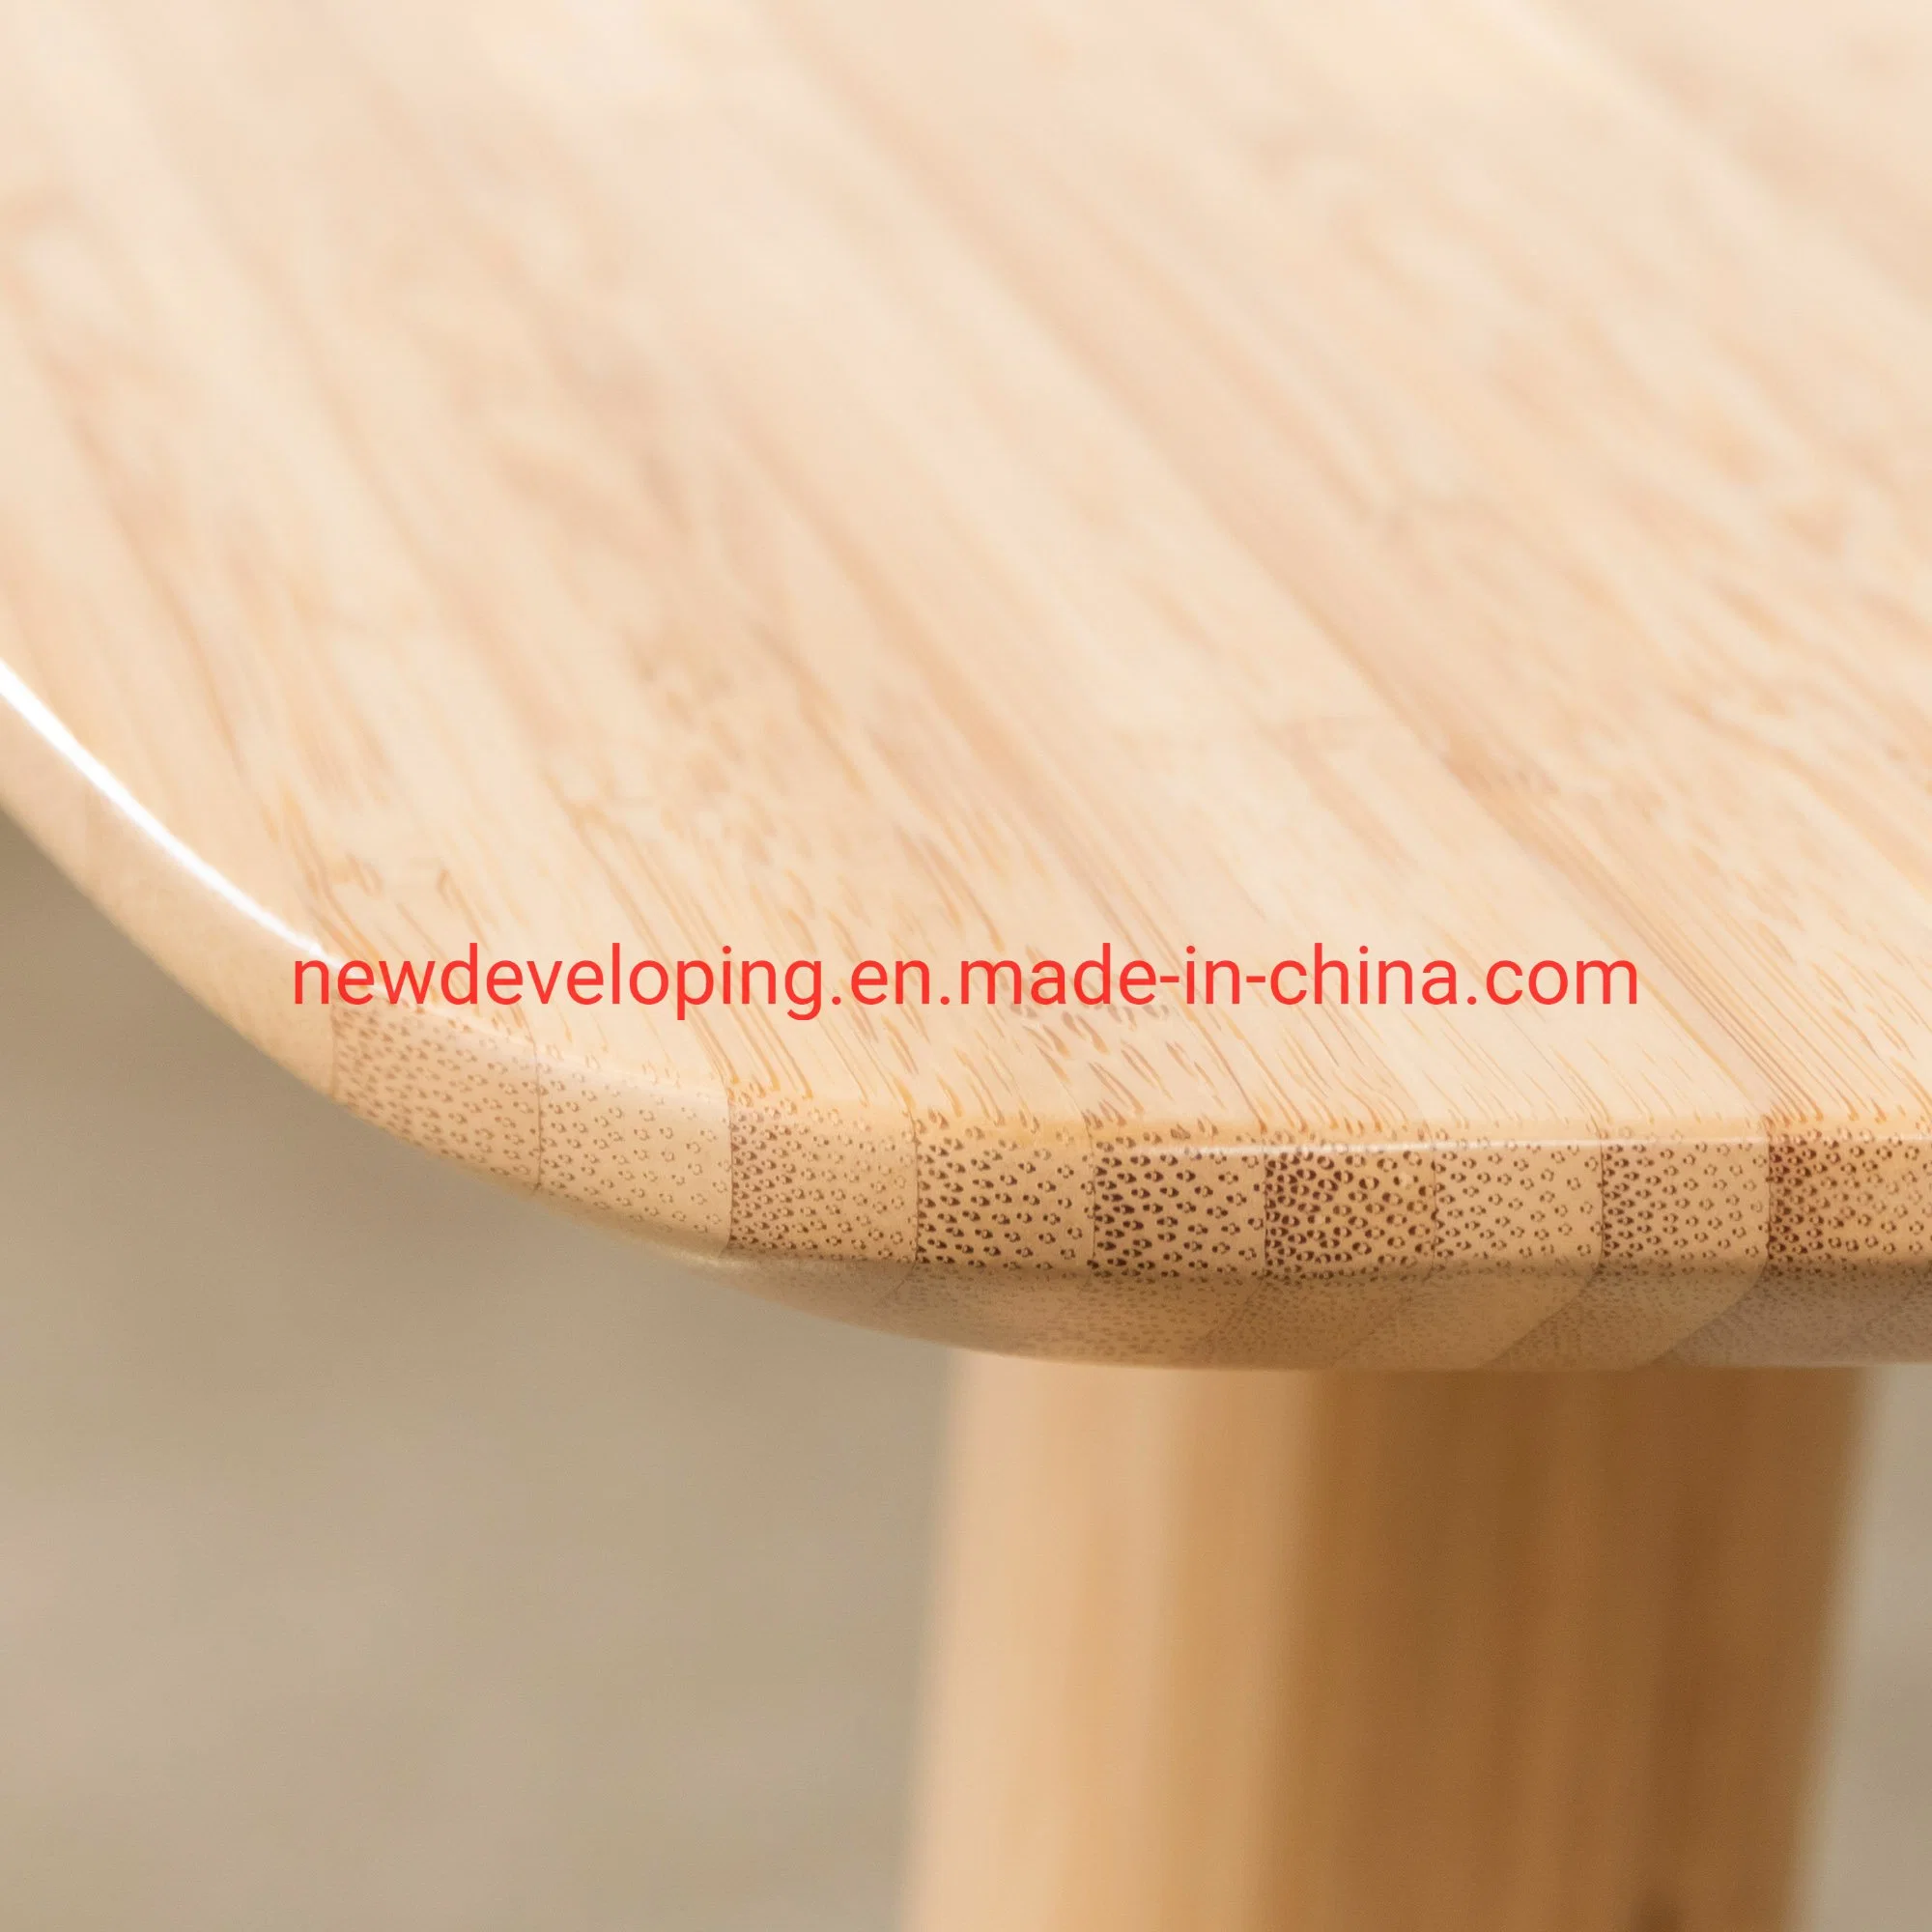 Restaurant Long Dining Table, Dining Room Furniture Fine Wood, Bamboo Panel Dining Table Set